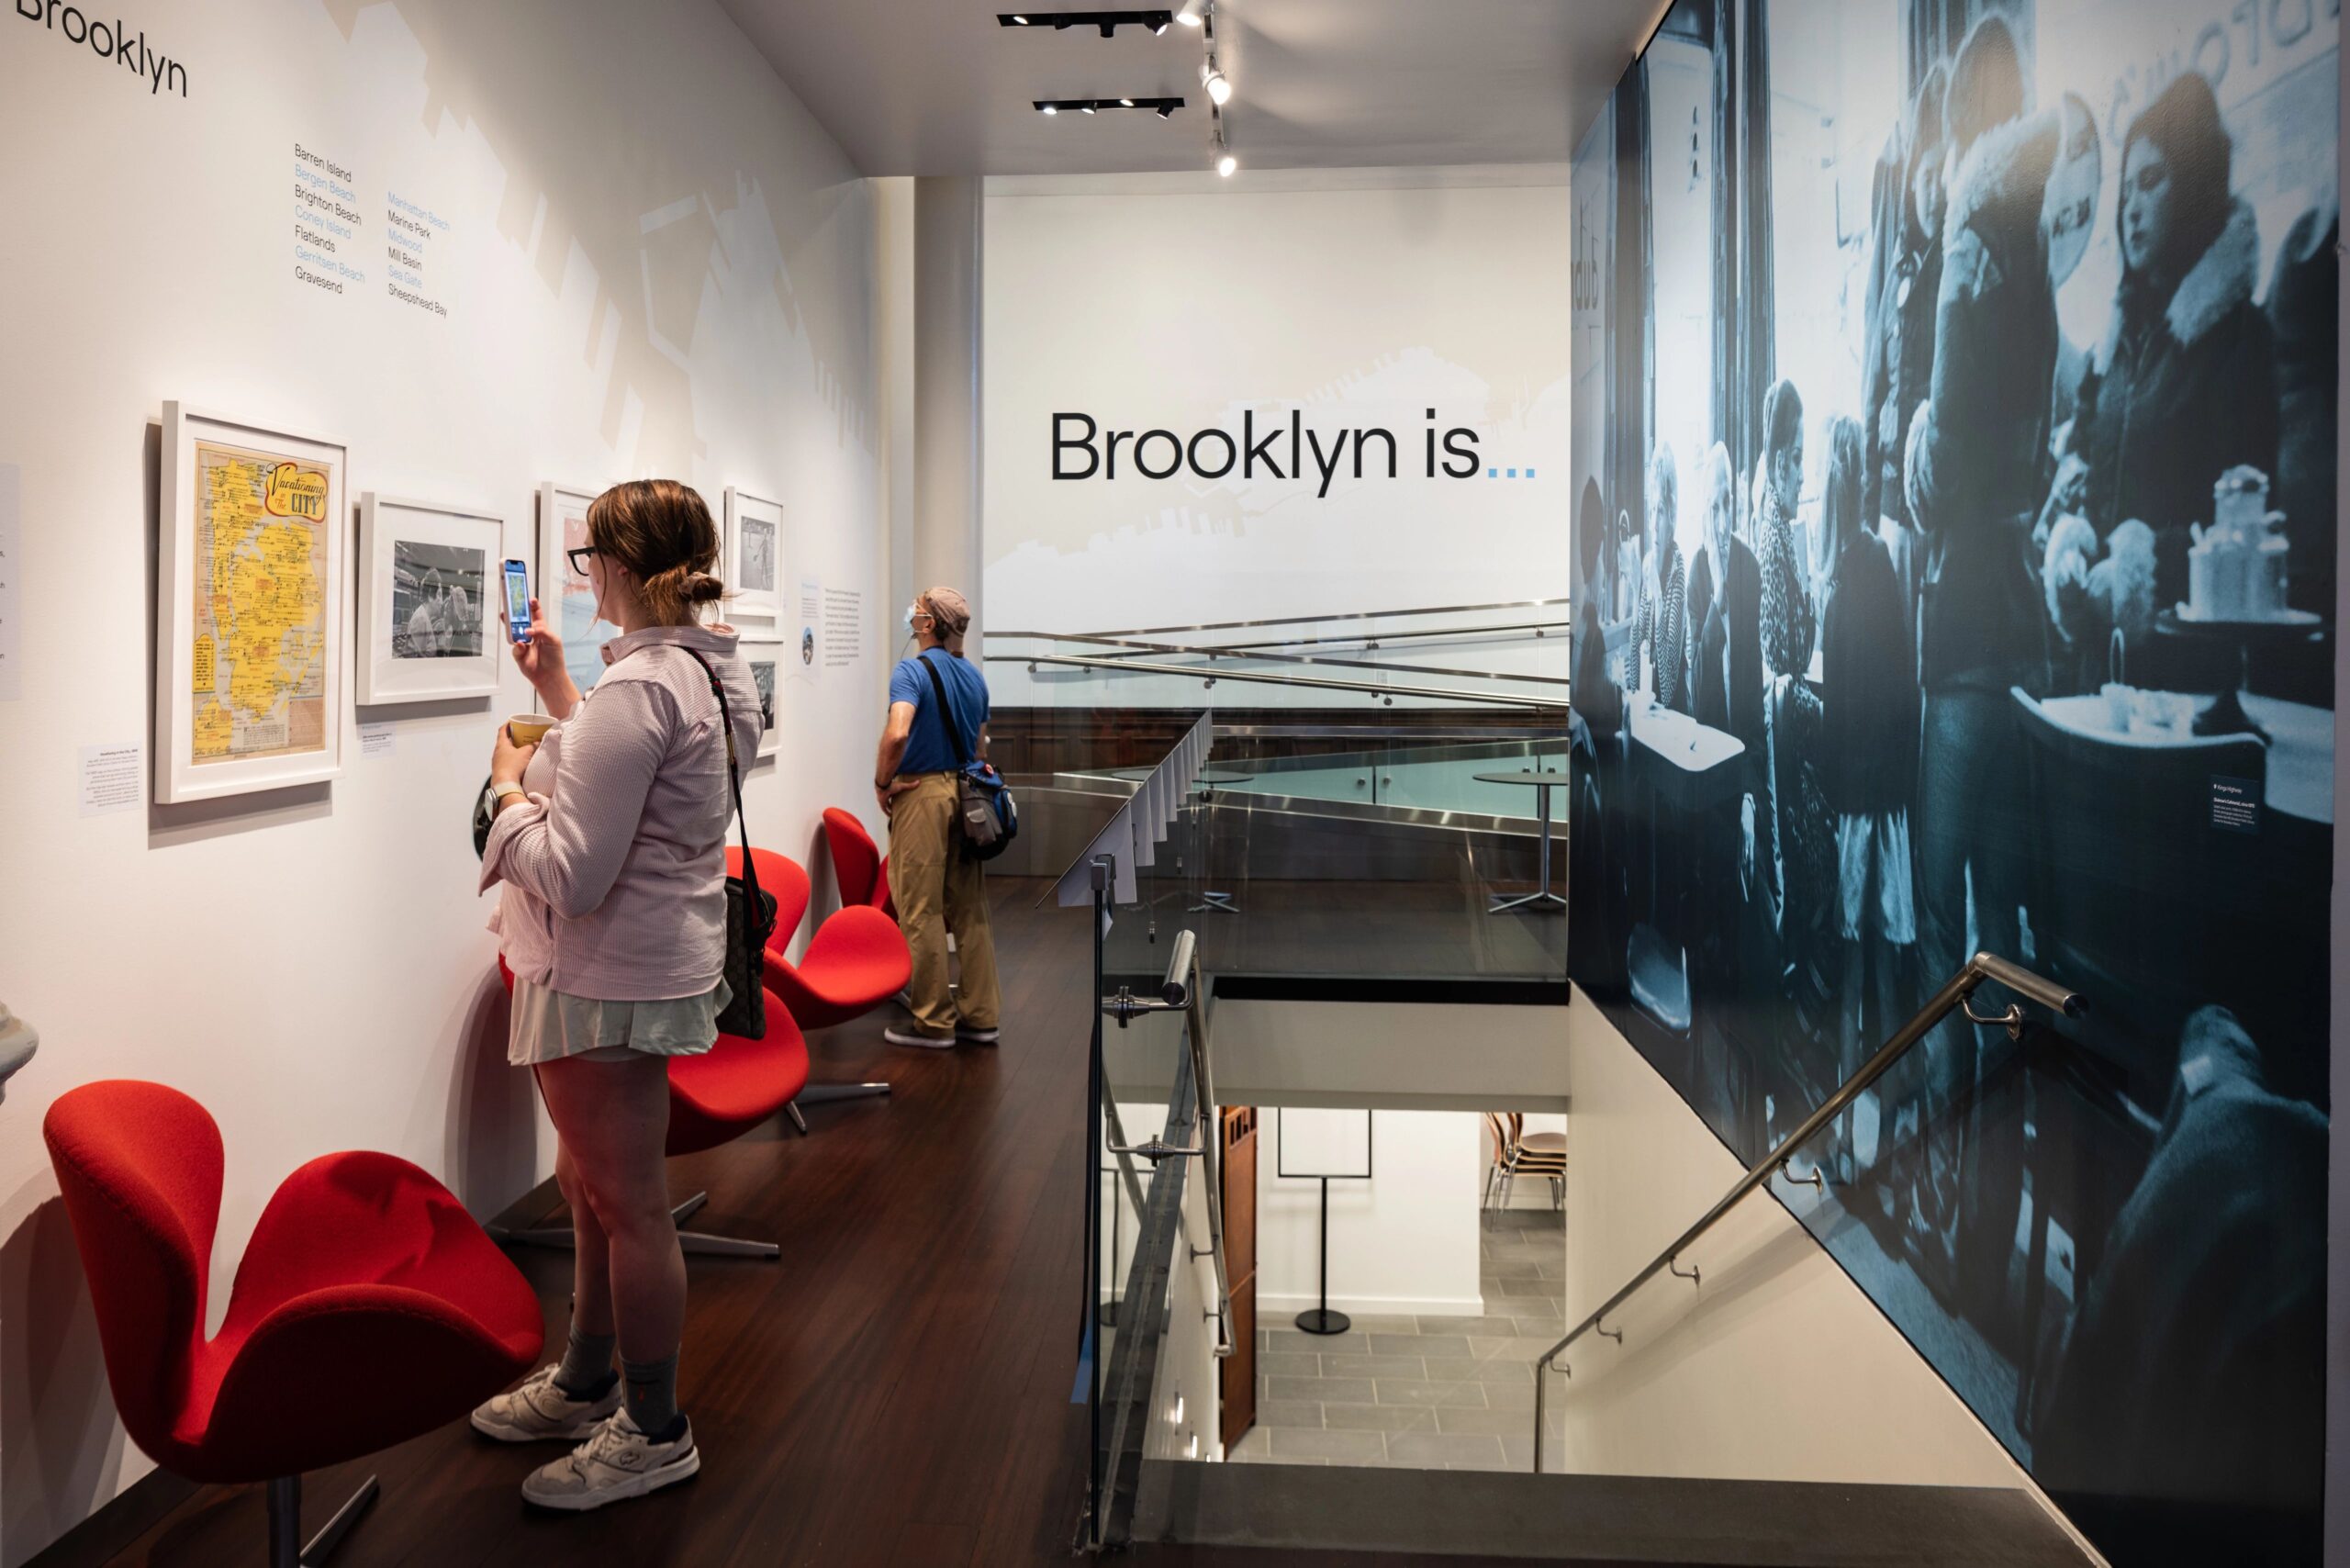 Newly renovated Center for Brooklyn History "Brooklyn Is..." exhibit